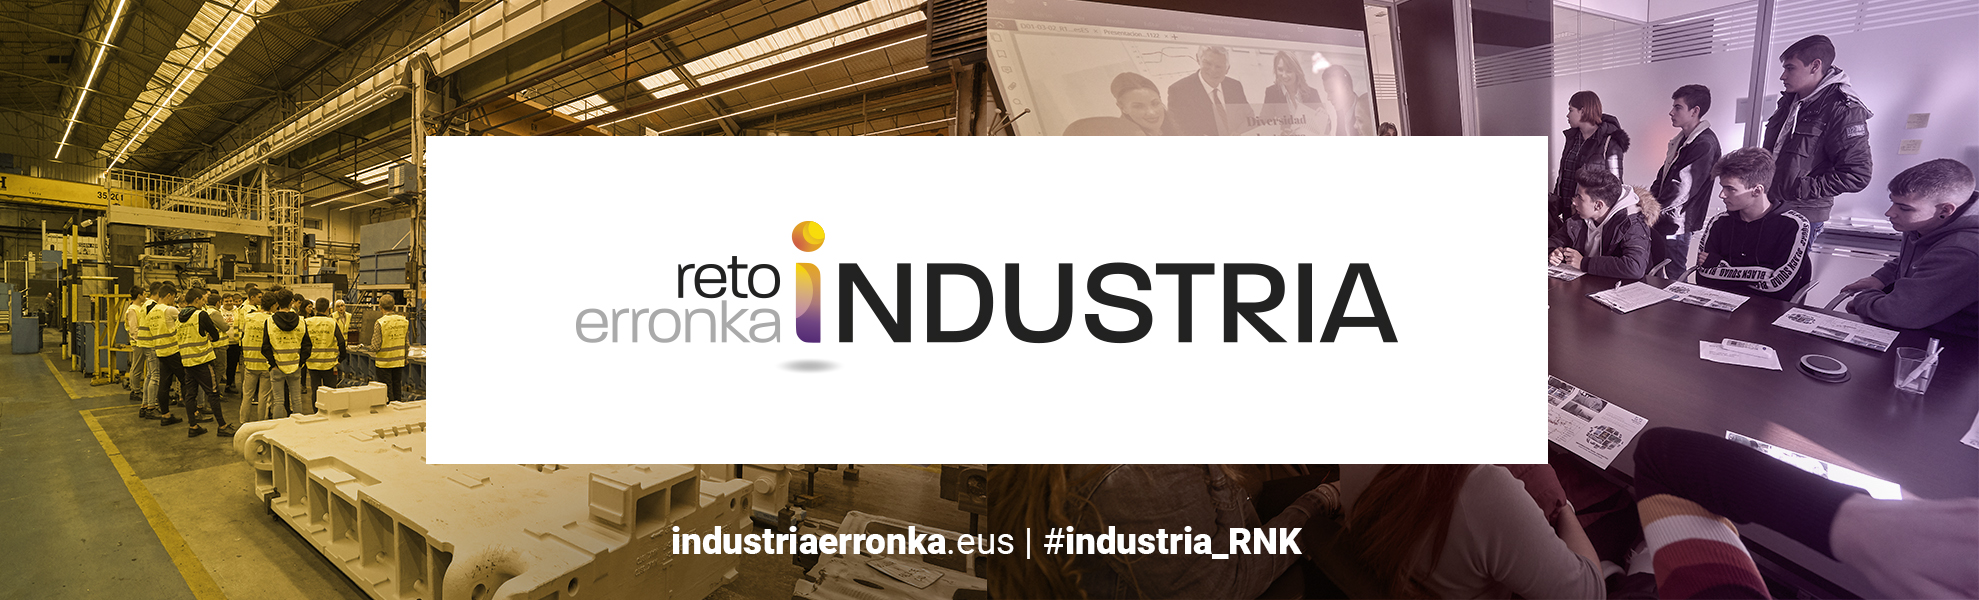 Velatia takes part in the Industria Erronka project to promote future talent in industry